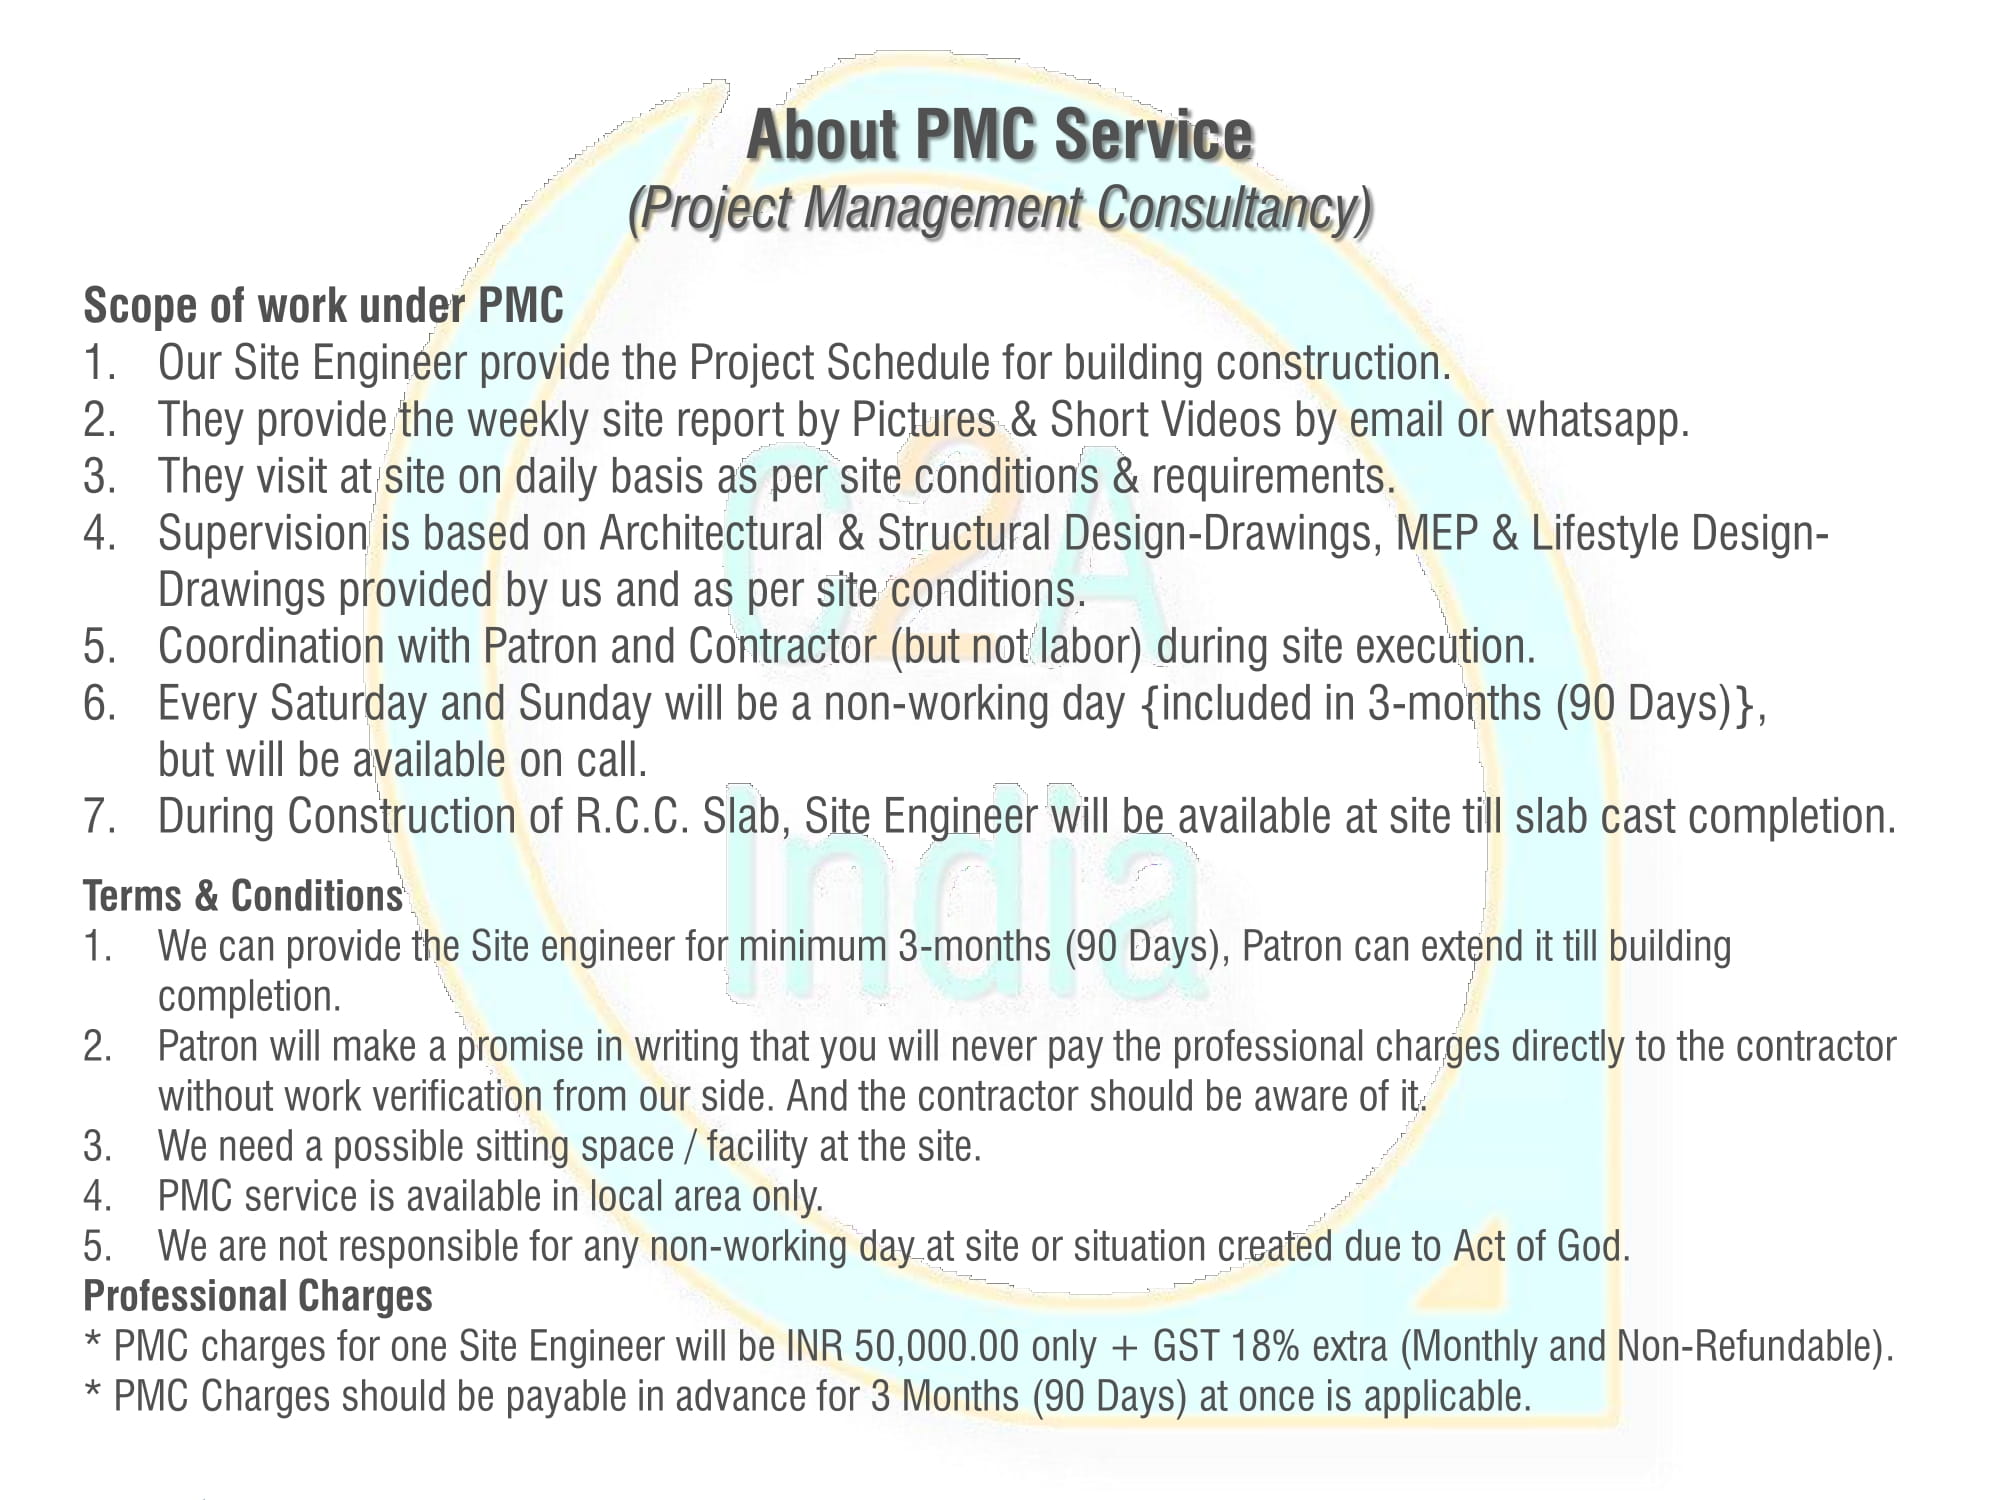 About PMC Service